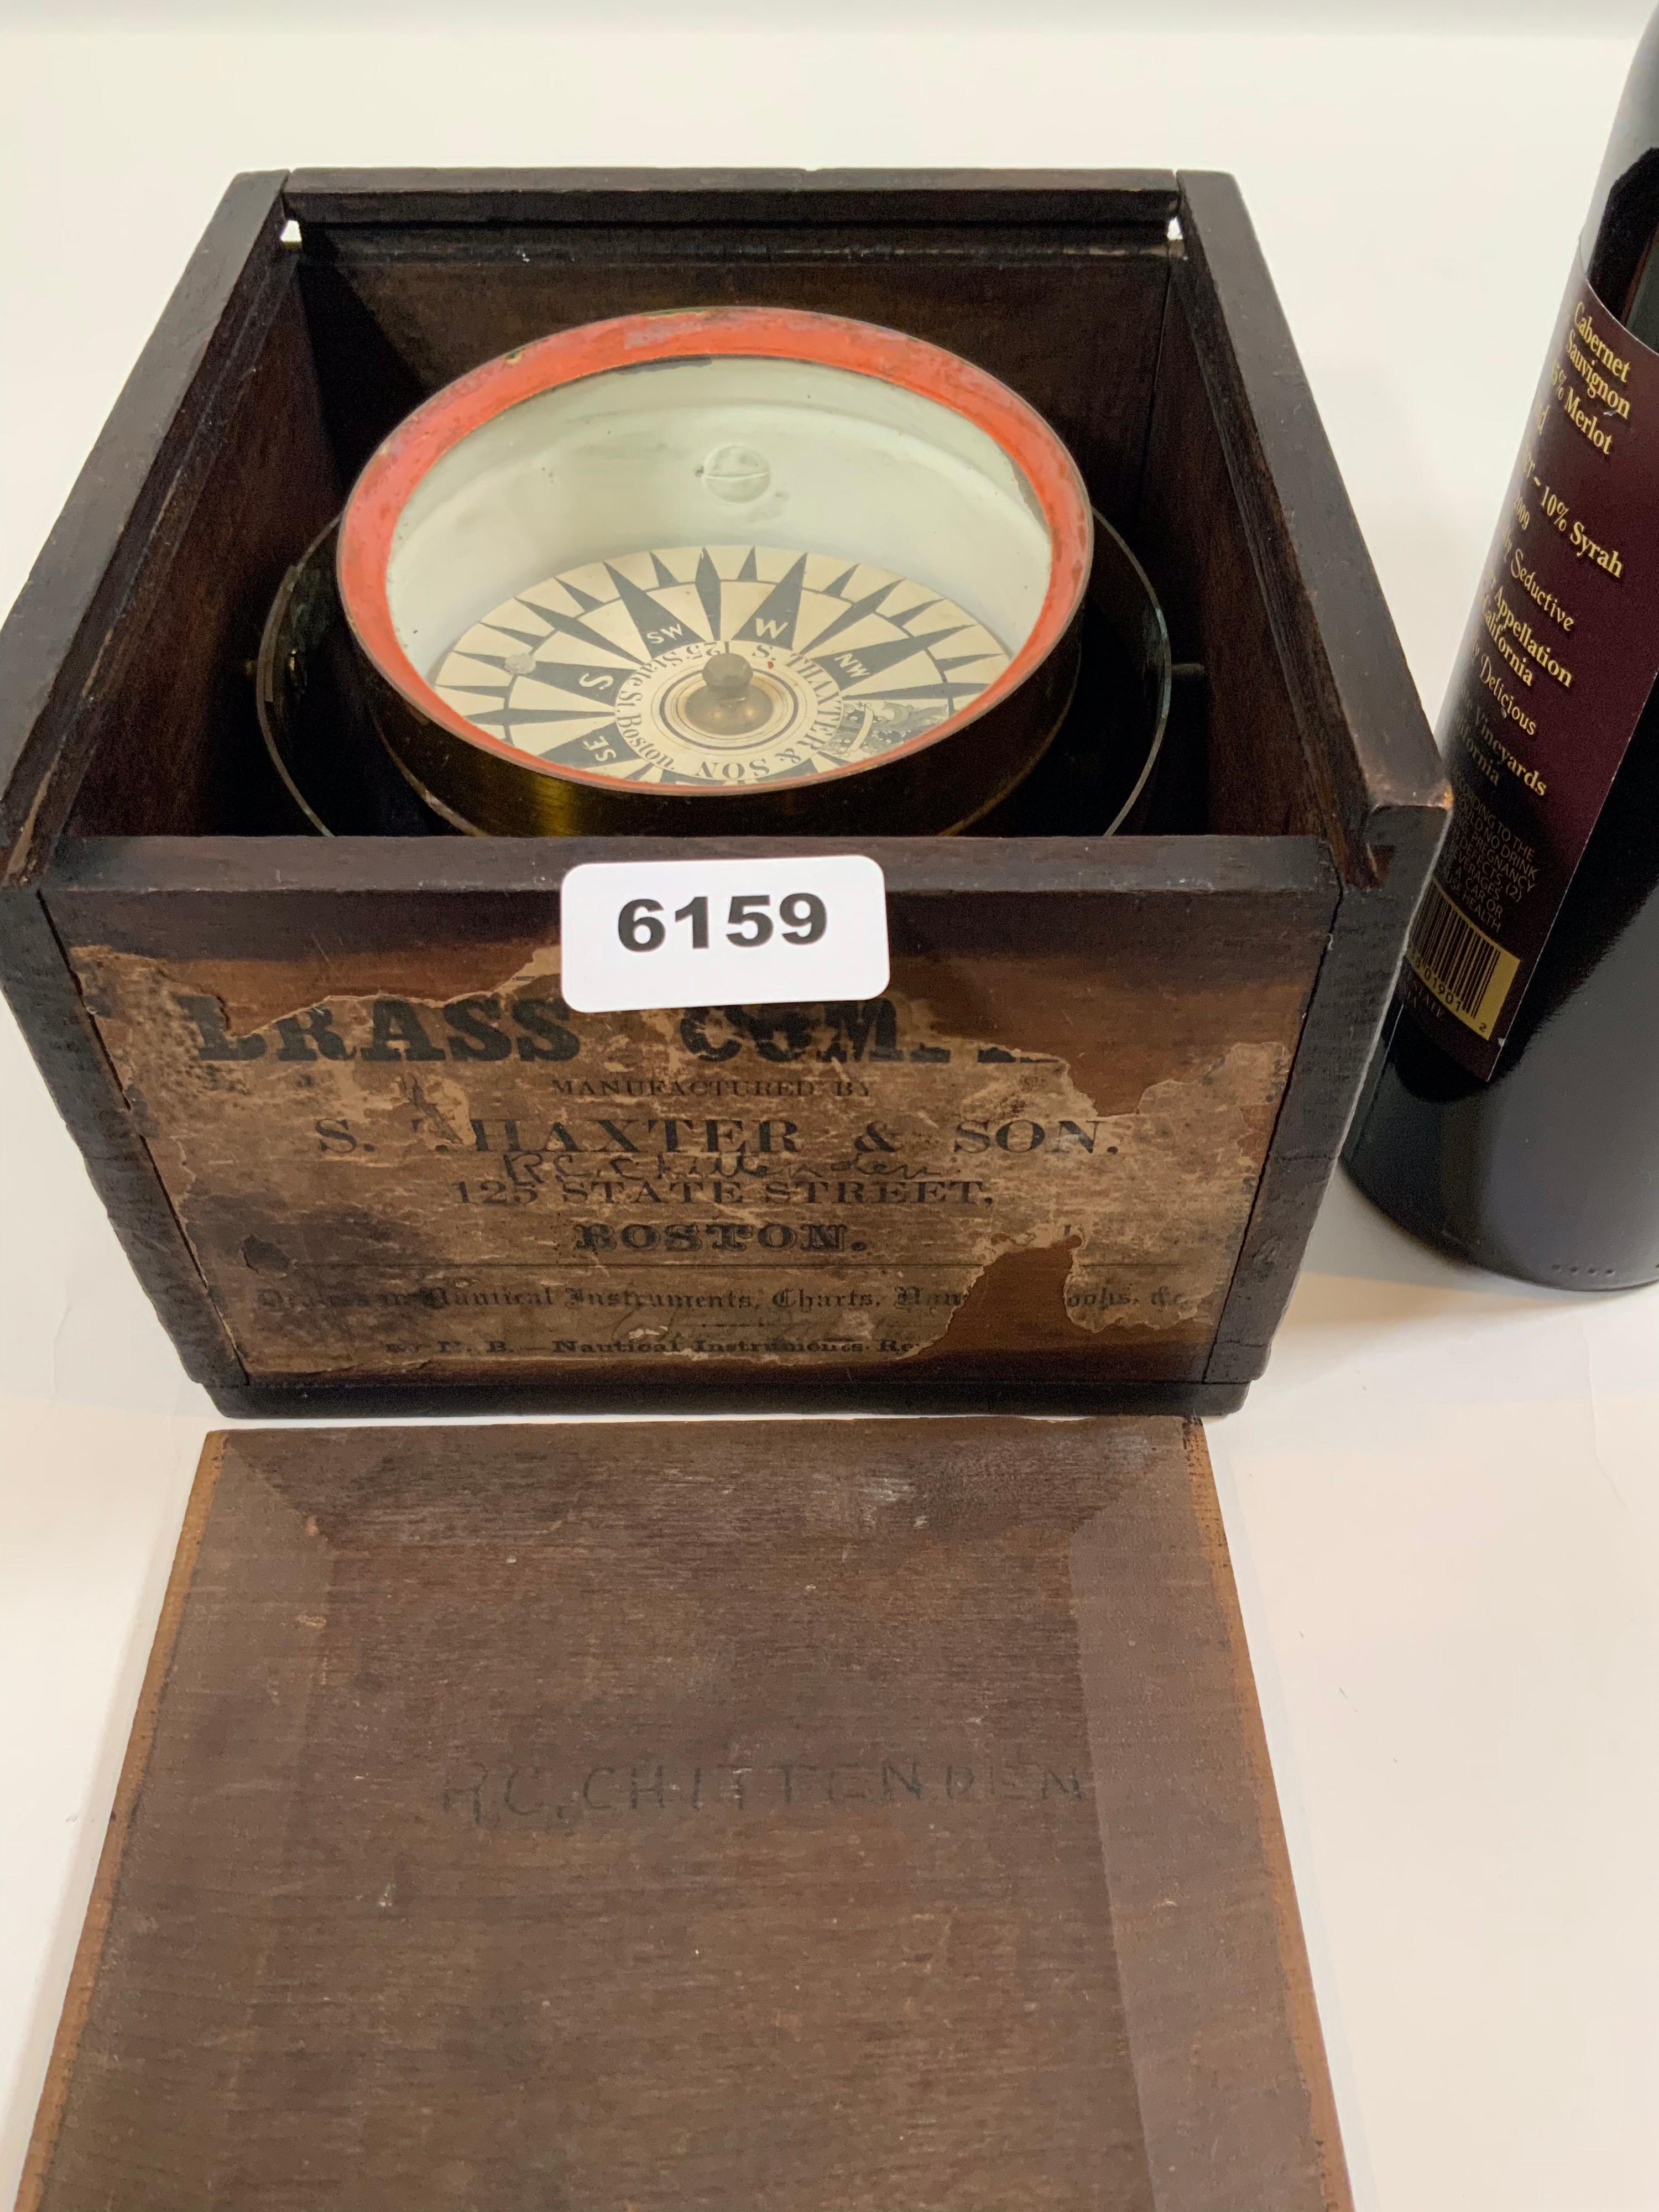 Nineteenth century boat compass in spun brass bowl by S. Thaxter and Sons of 125 State St, Boston, Massachusetts. Fitted to a timber box with remnants of the original Thaxter label. This is circa 1880. Compass card is in excellent